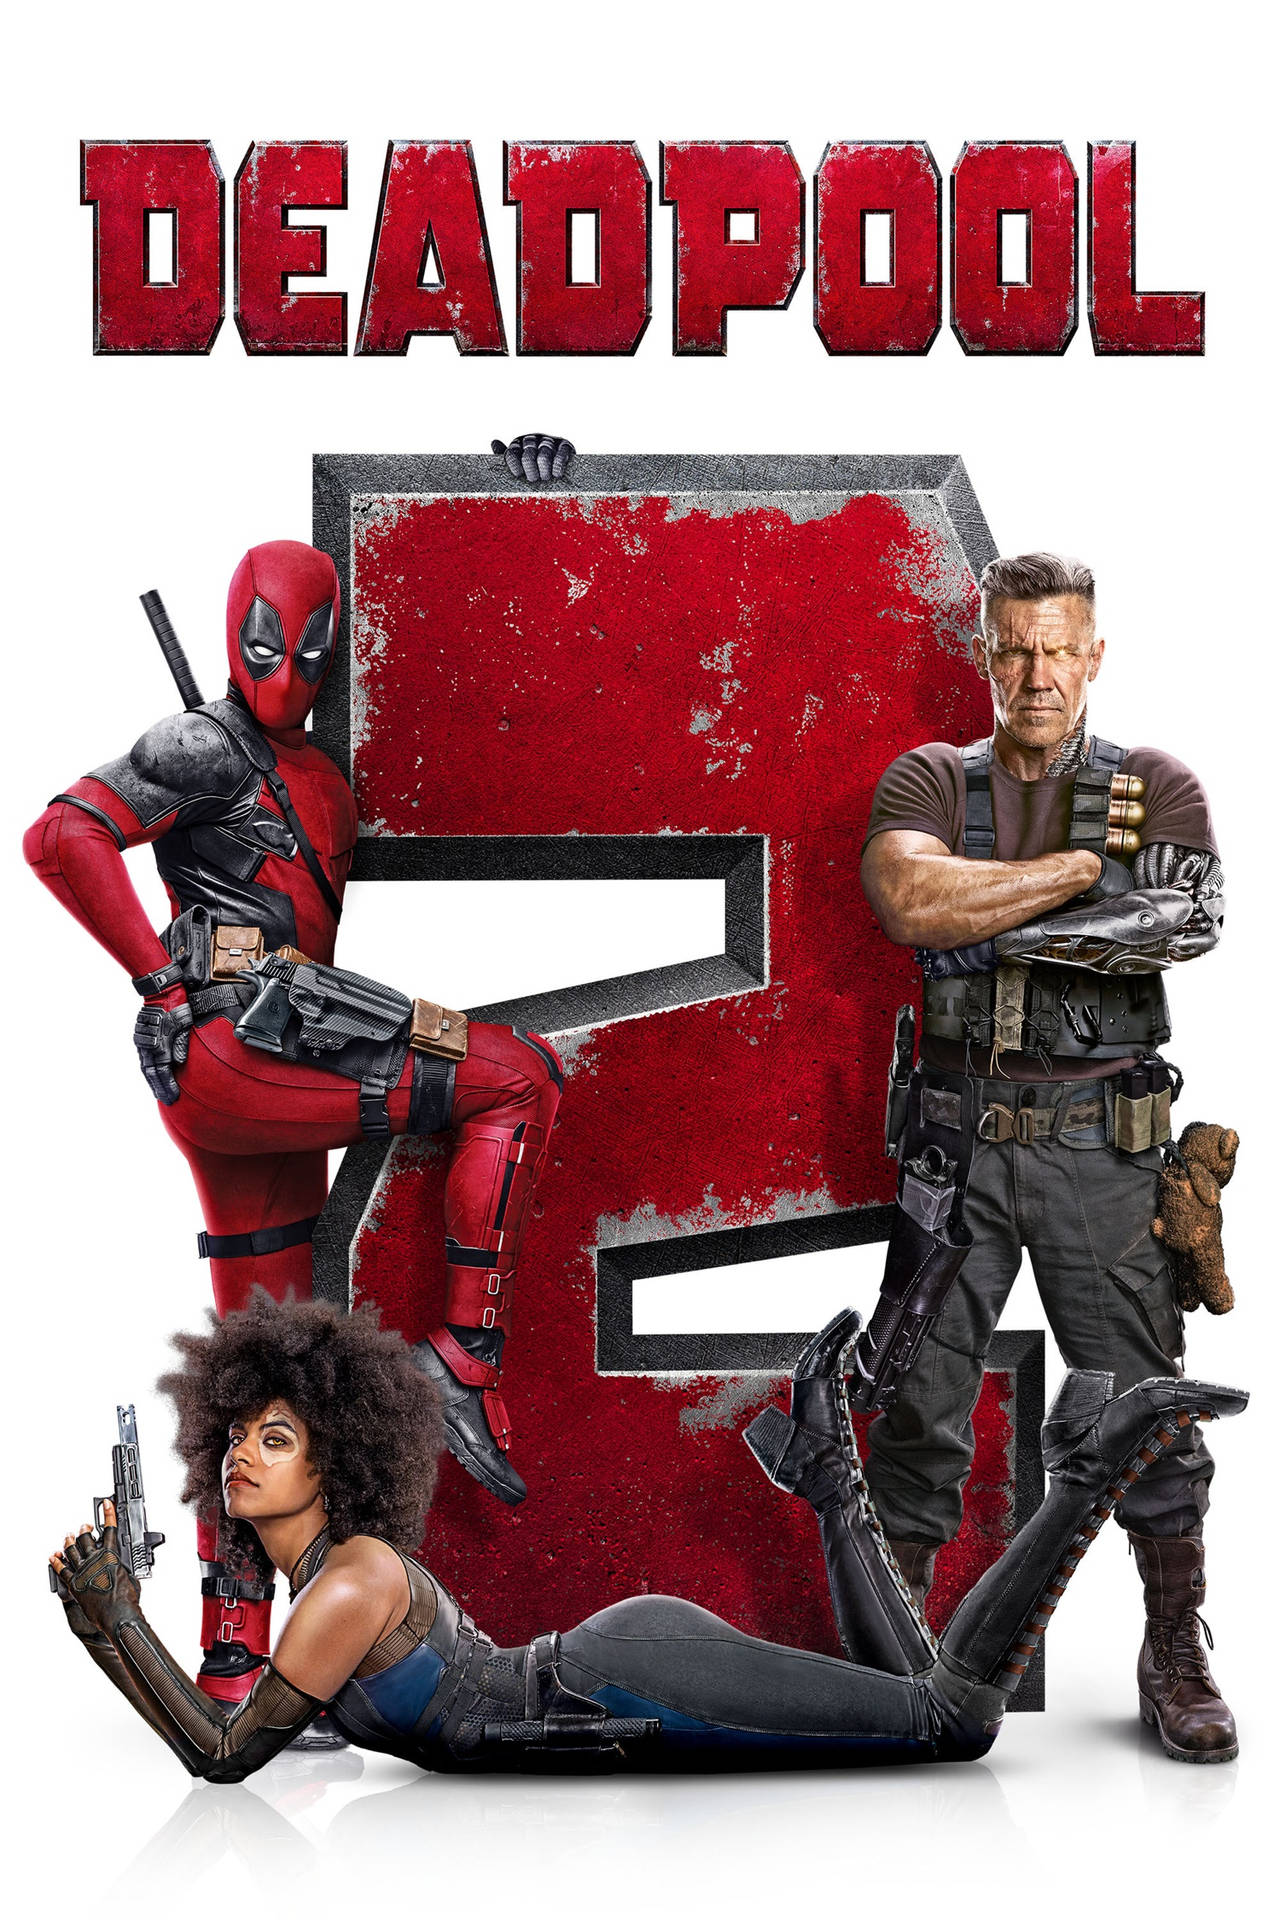 Deadpool Movie 2 Poster With Cable And Domino Wallpaper